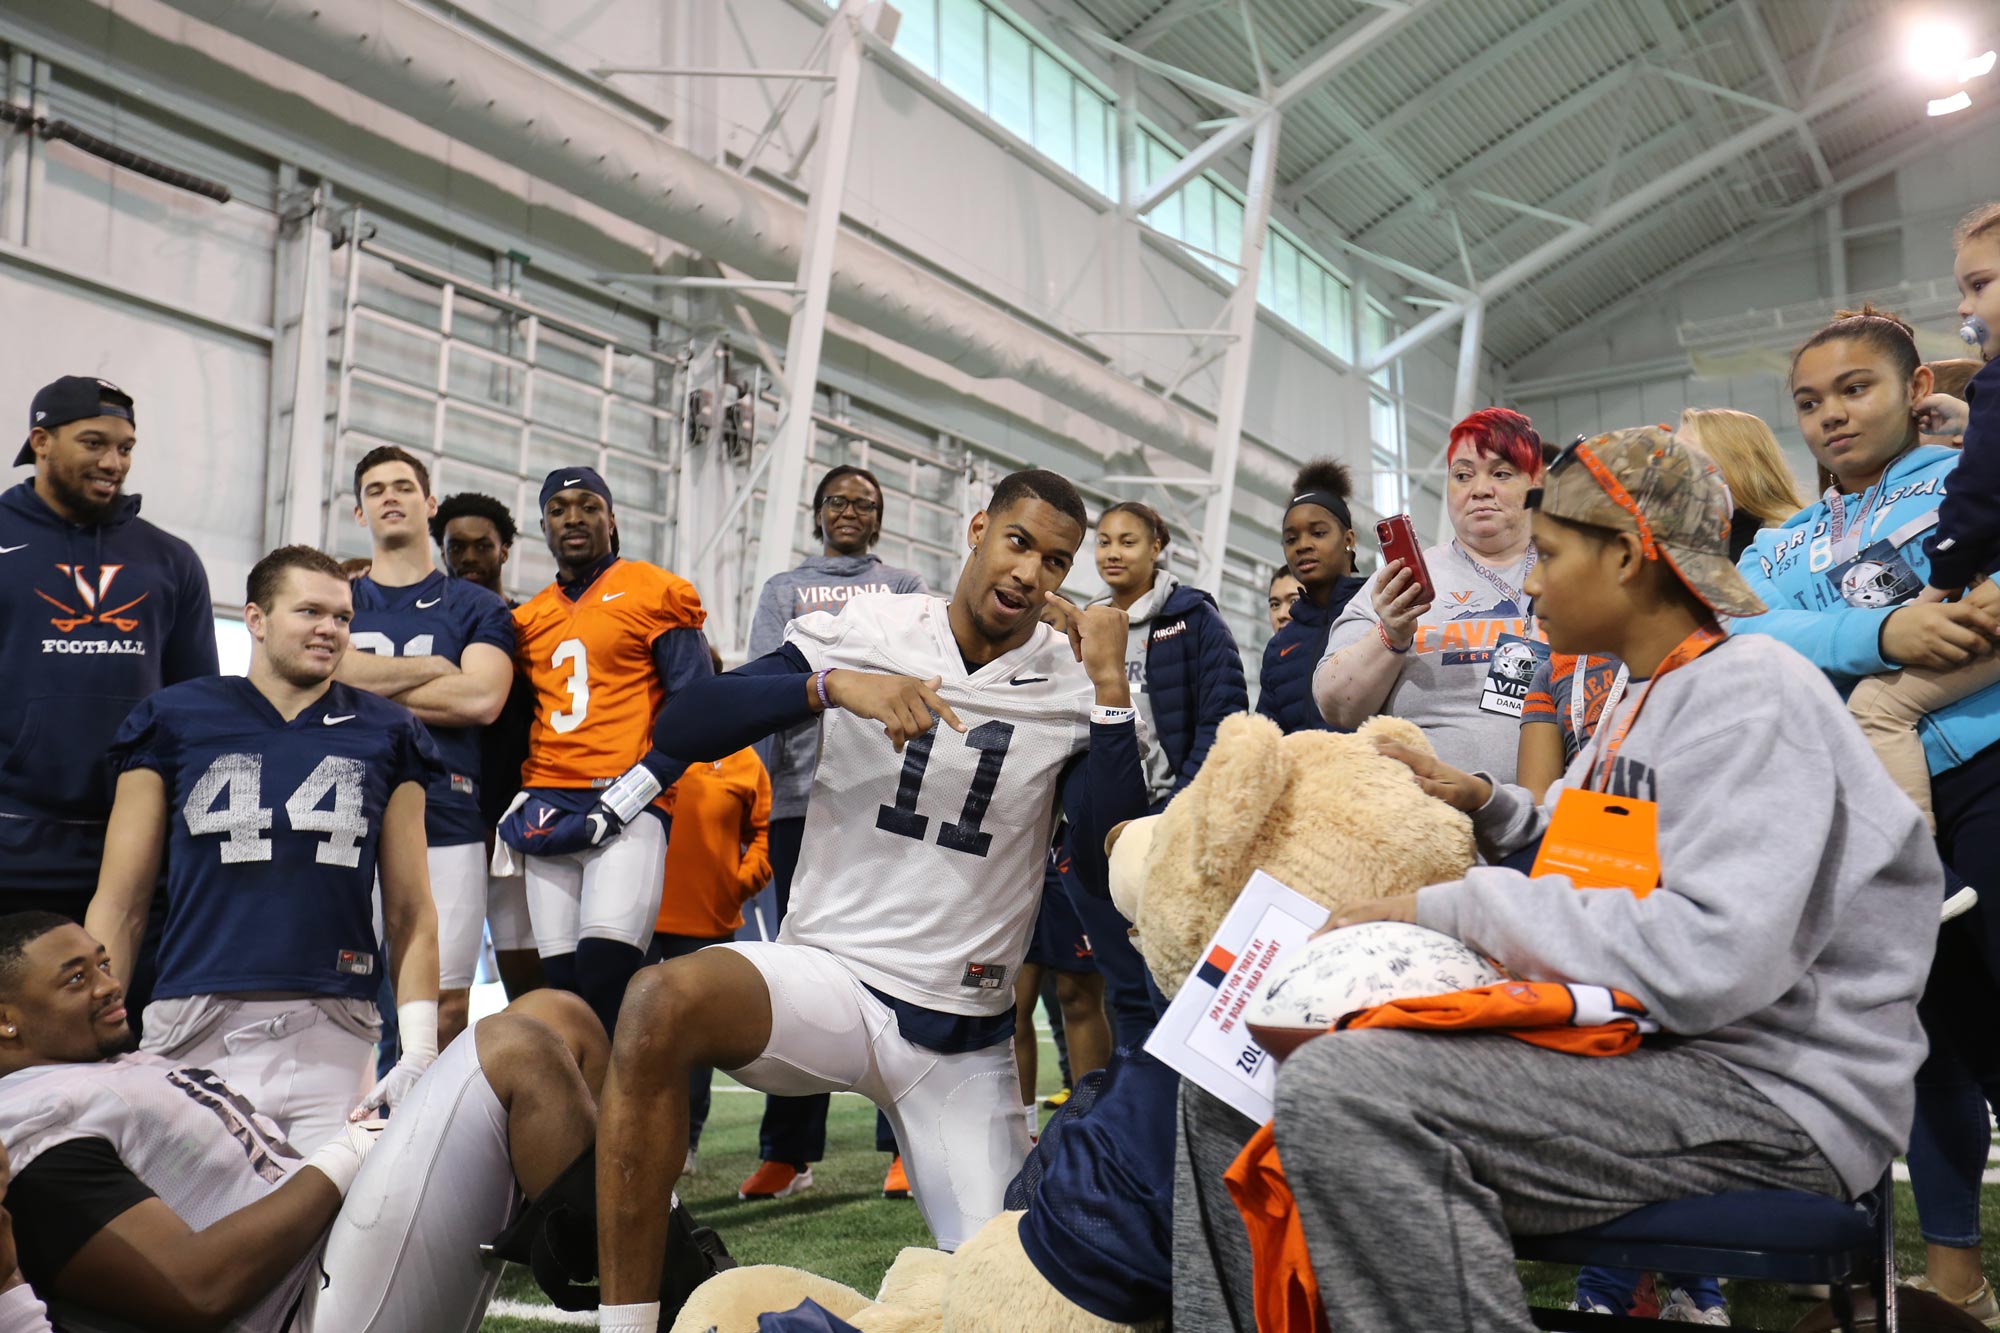 UVA football team talking to Thursdays special hero who is sitting in a chair